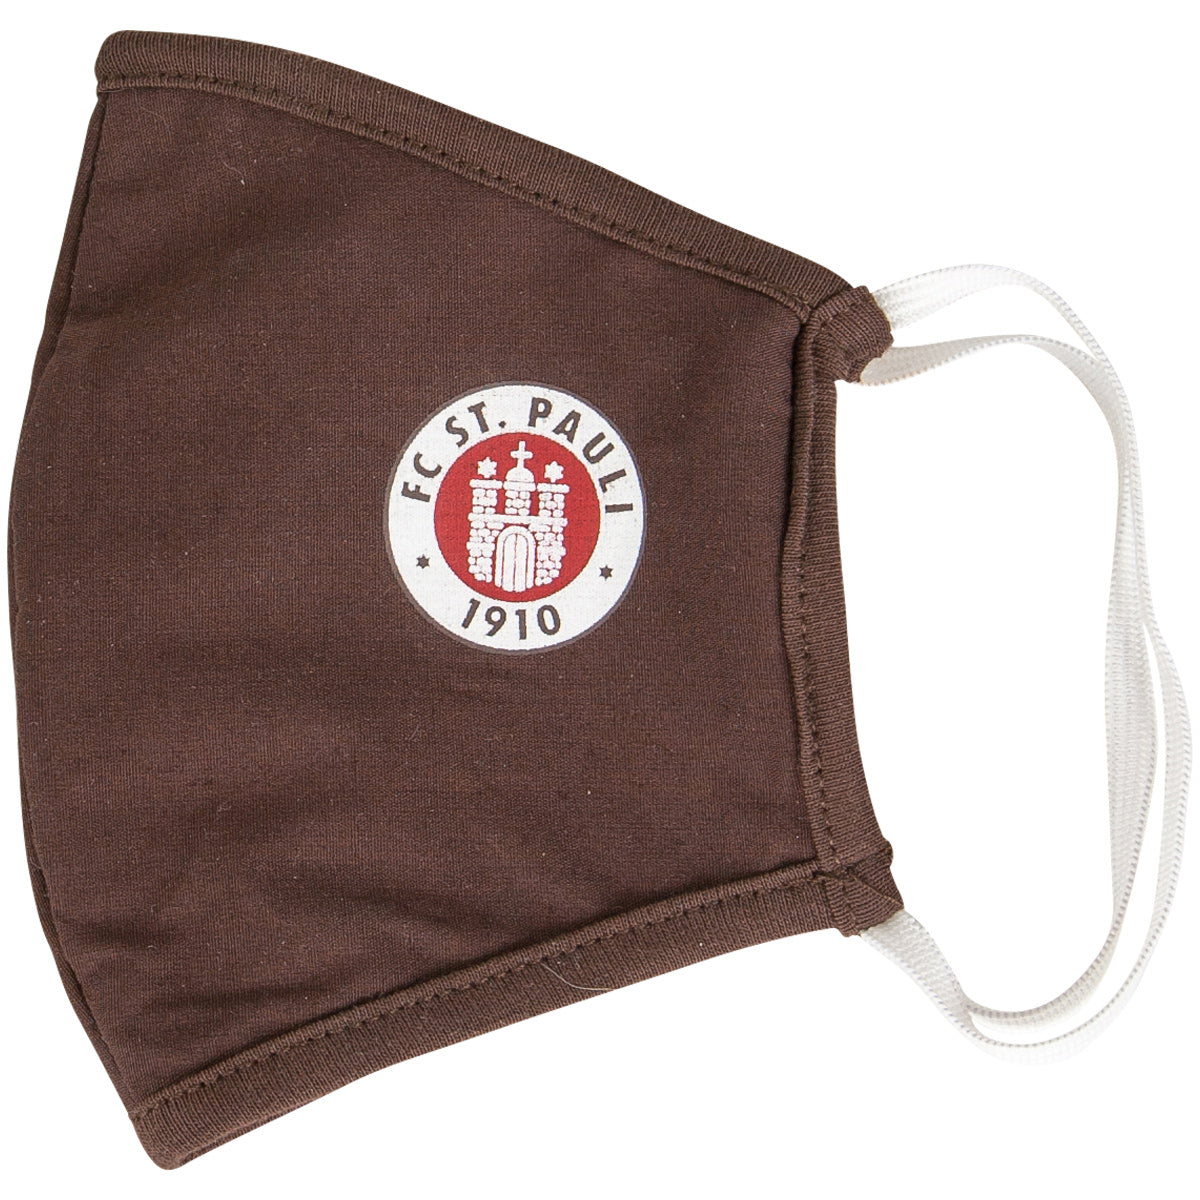 FC St.Pauli mouth covering mask logo brown